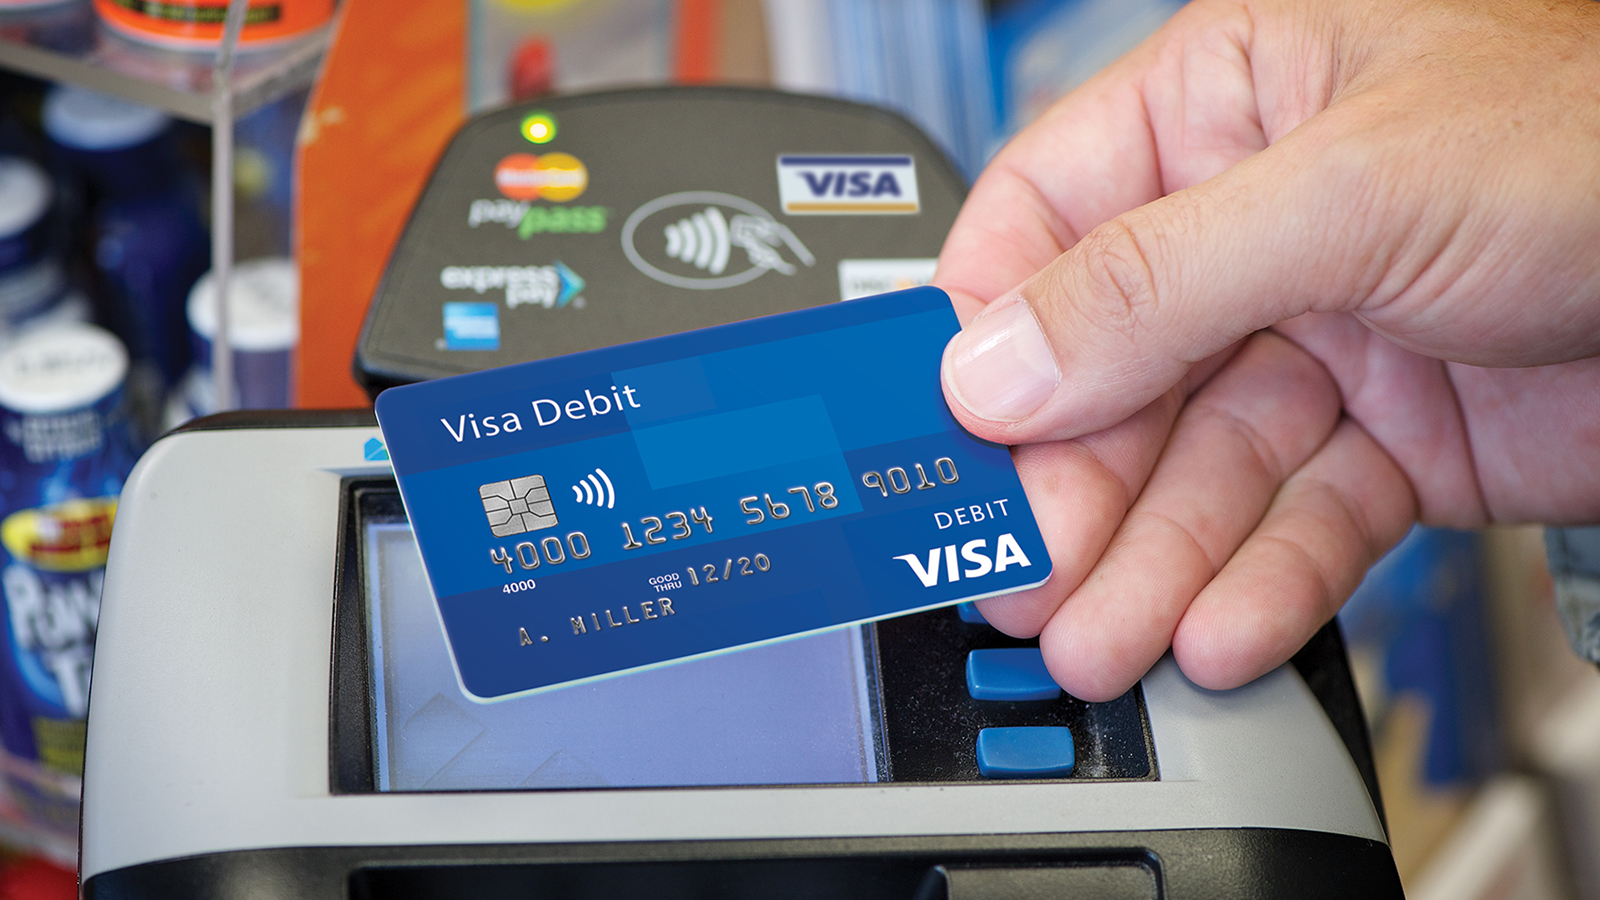 Presenting a contactless Visa debit card at checkout.